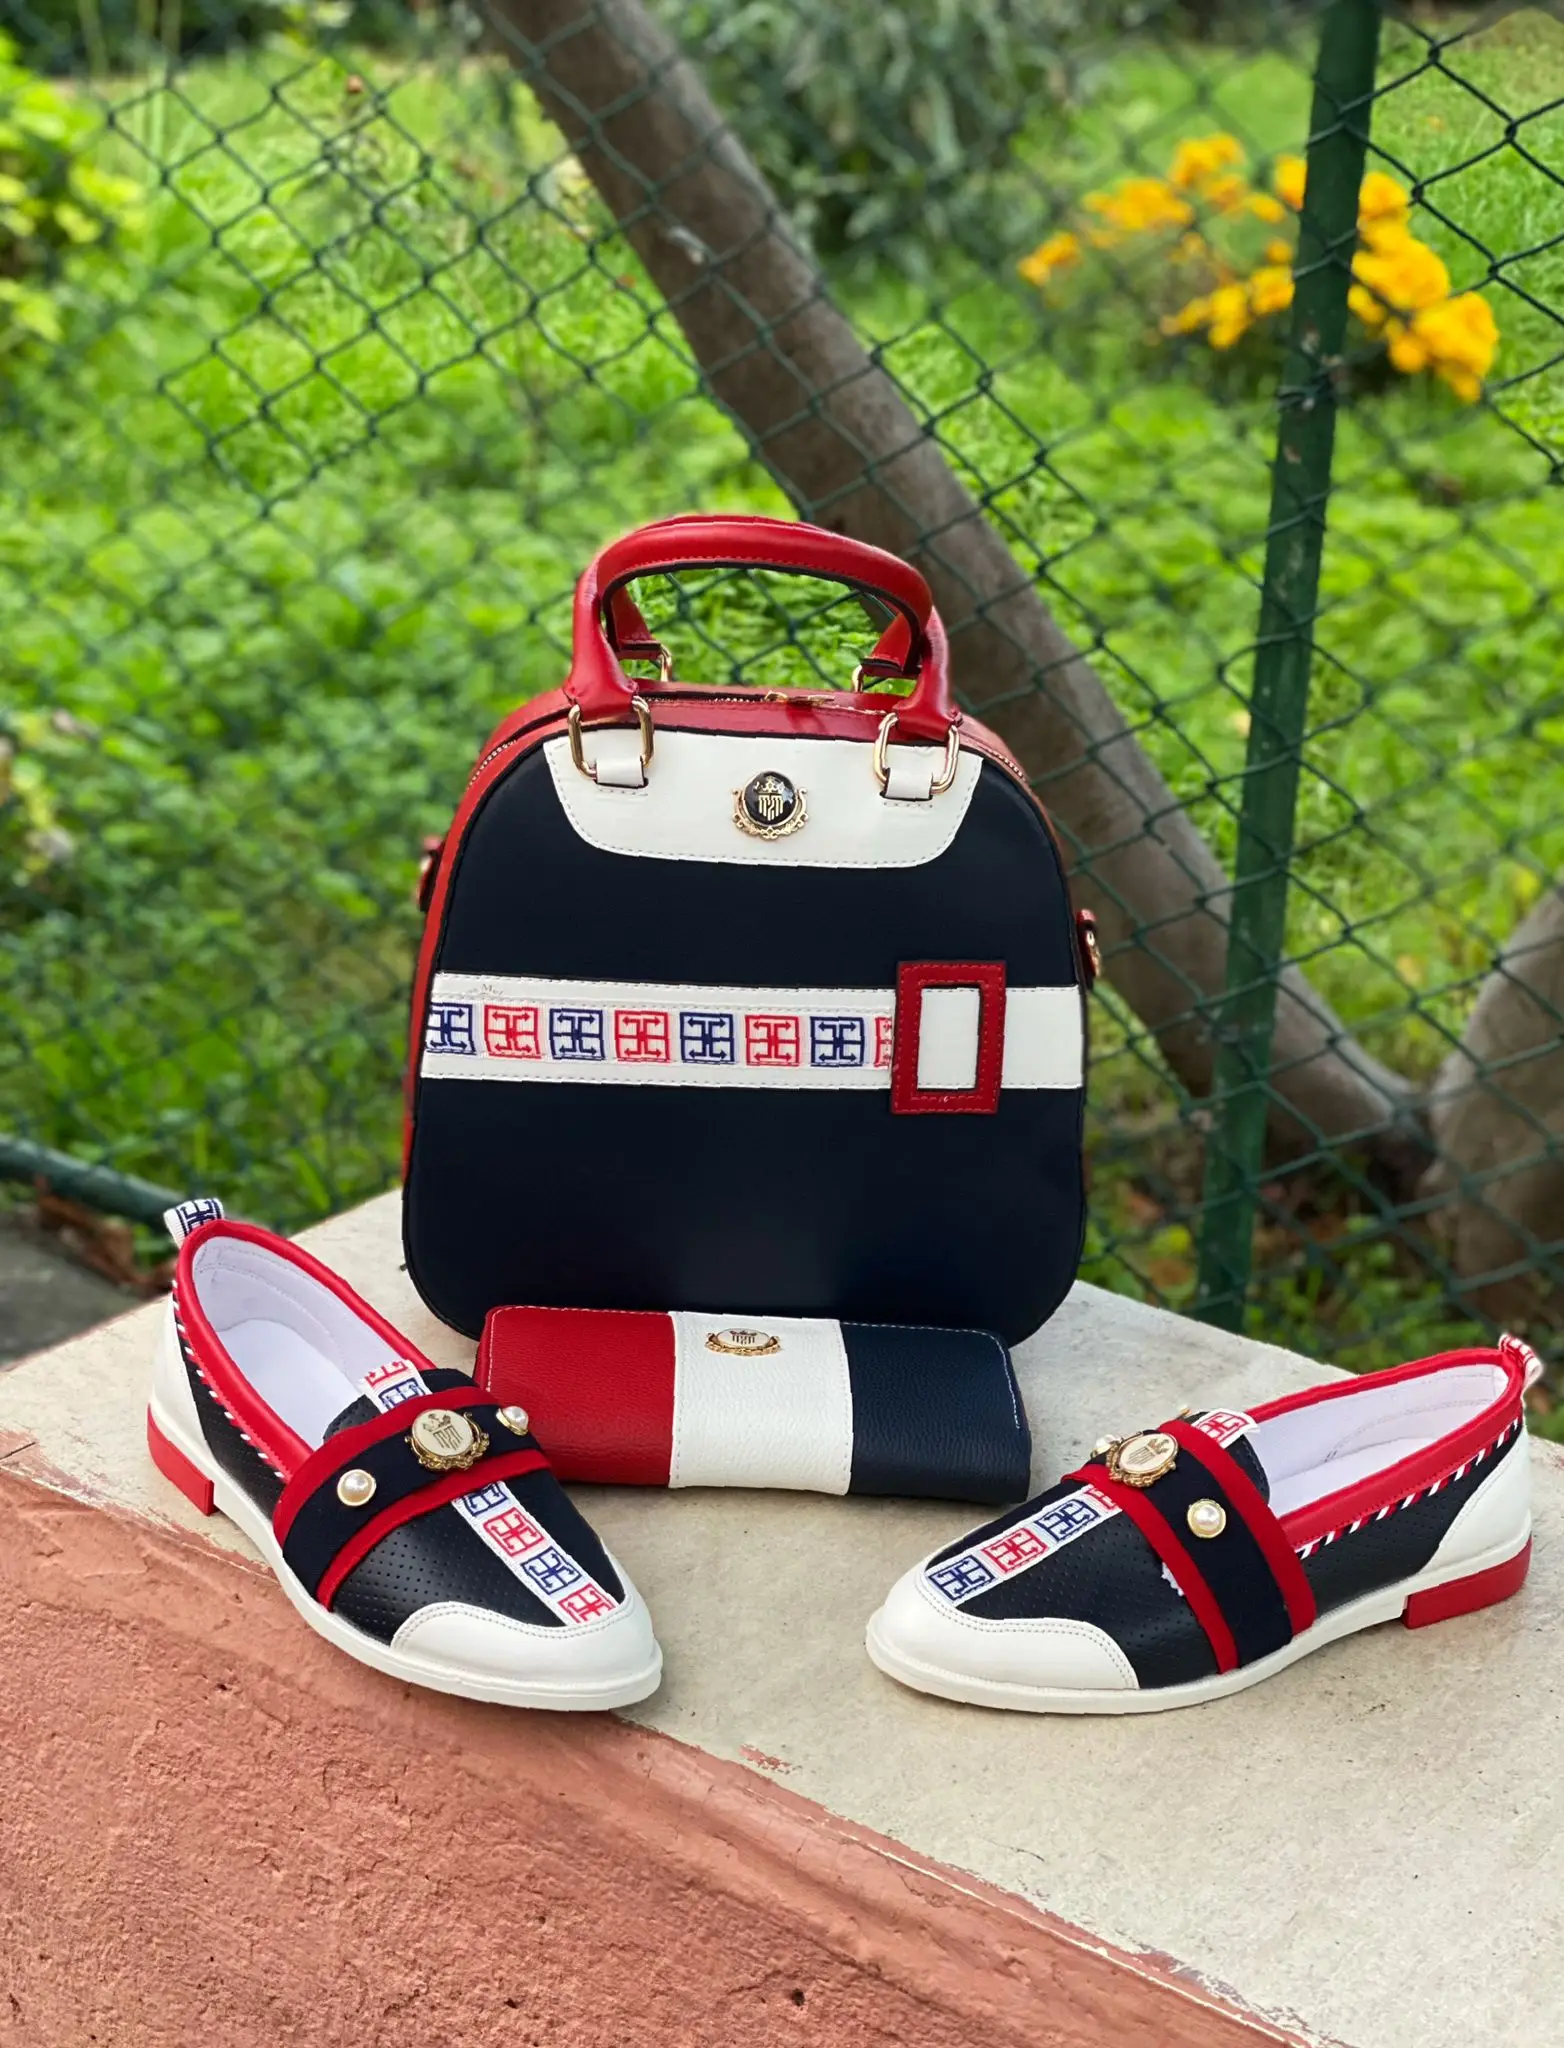 

Miss Melisa Shoe and Bag Tmy Blue,Red,white color flat shoes and bag set B124